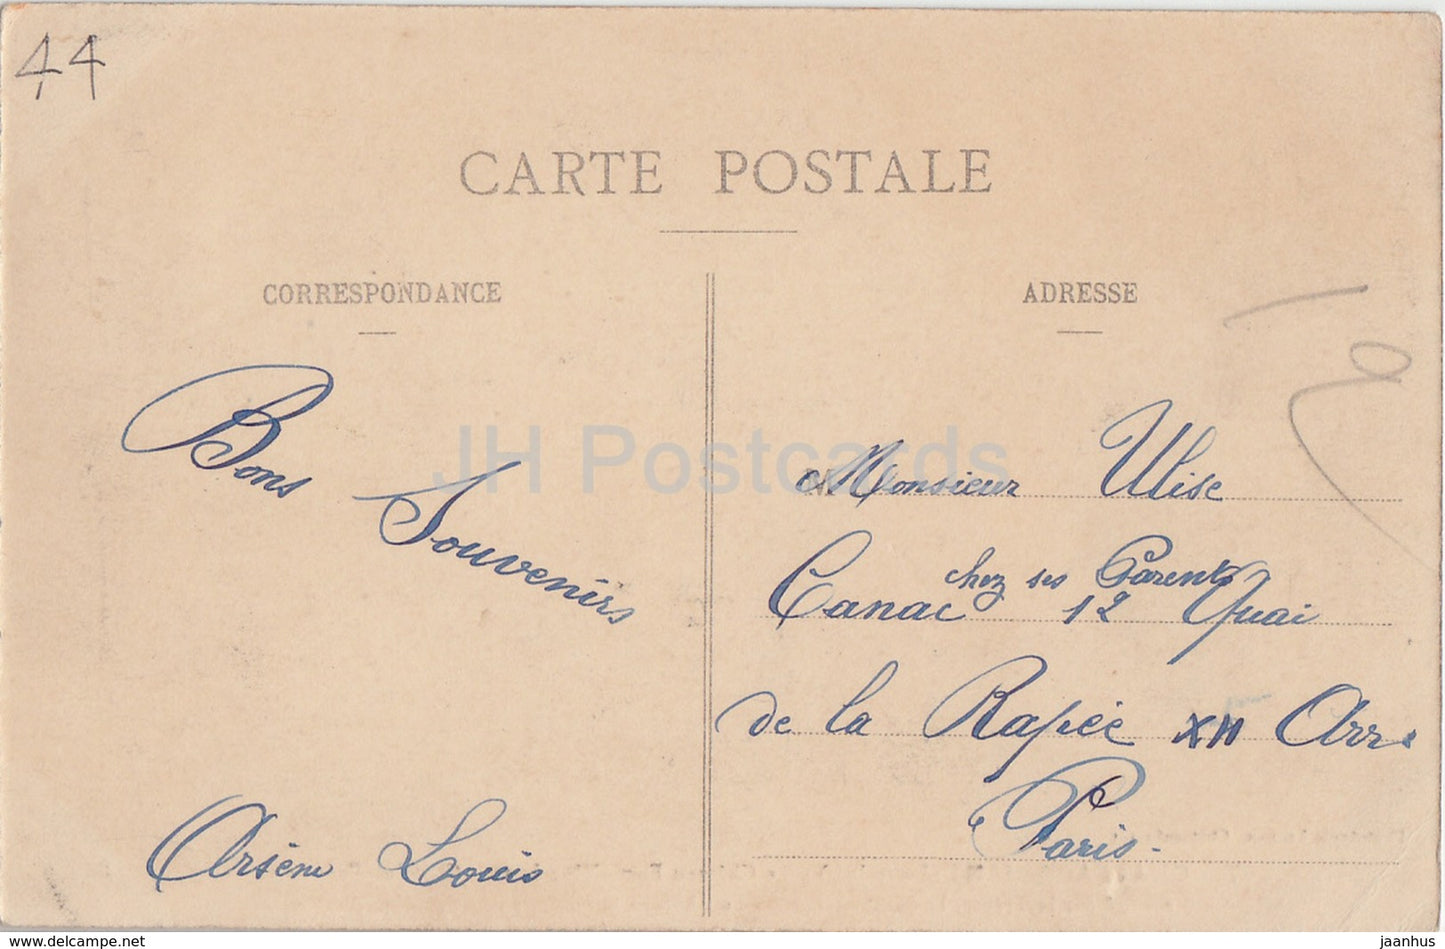 Chateaubriant - Le Chateau Fort - Chatelet d'entree et Courtine - castle - 267 - old postcard - 1912 - France - used